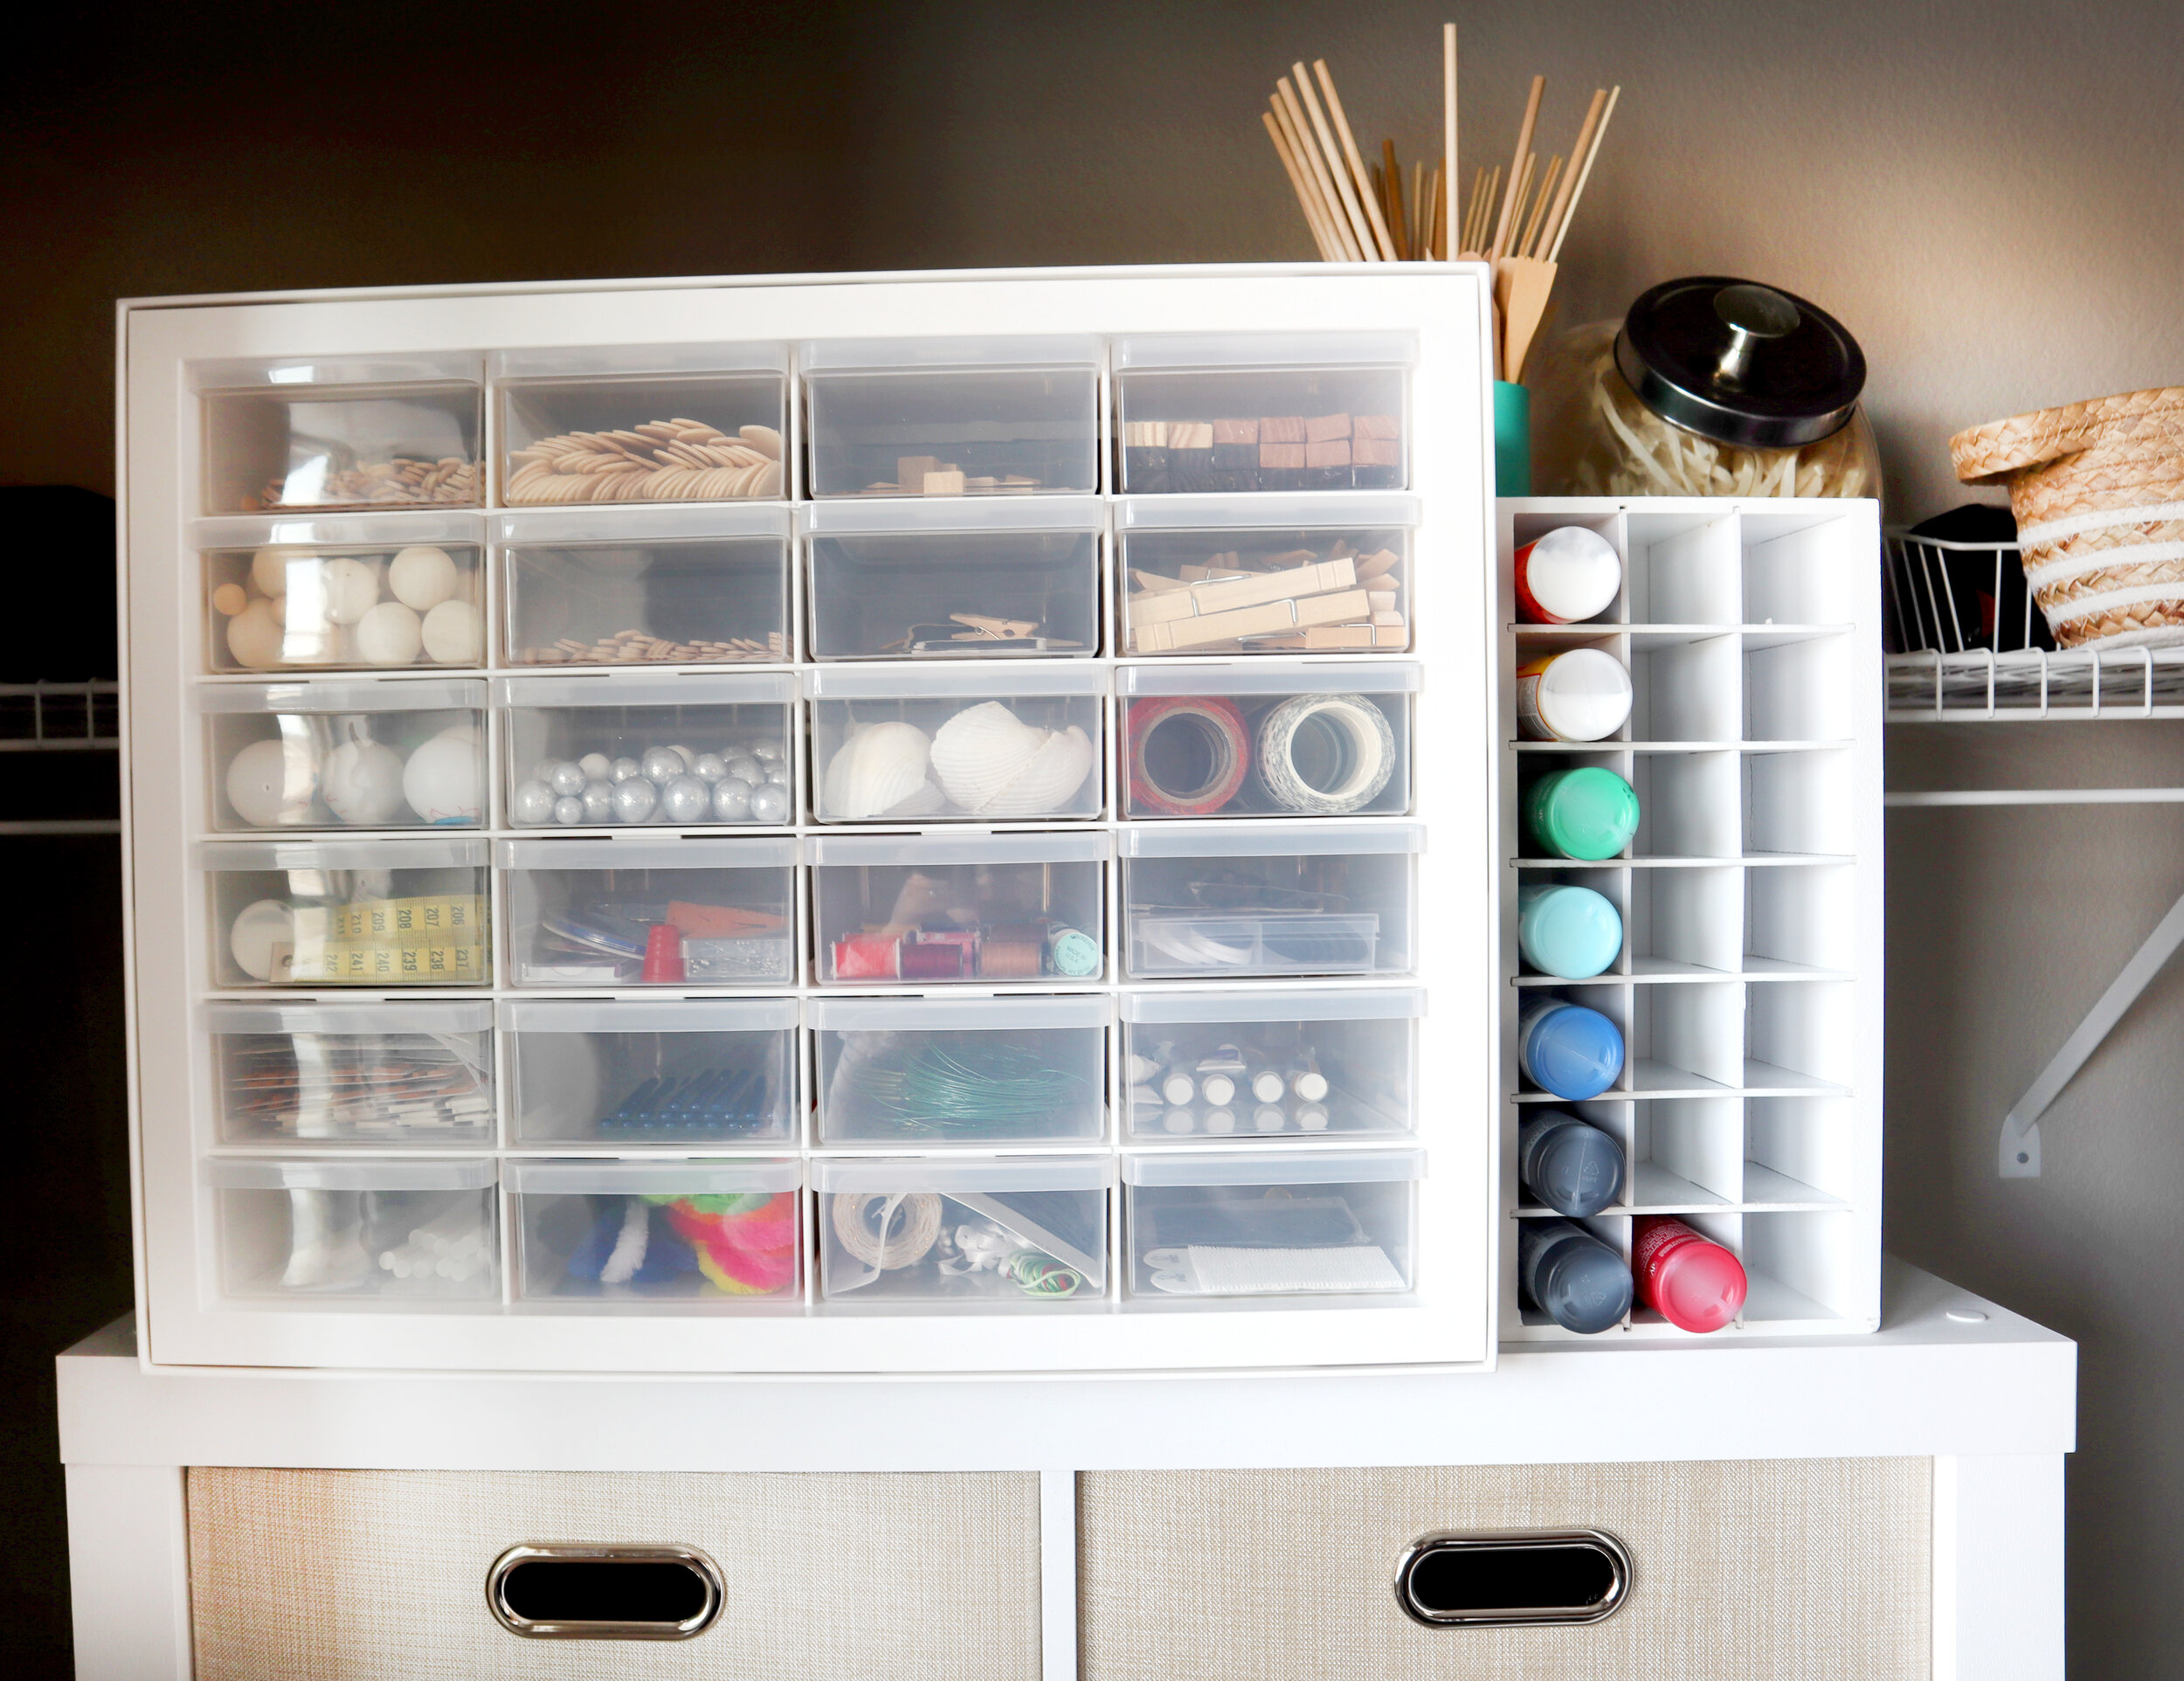 How to organize craft supplies in cabinets + drawers